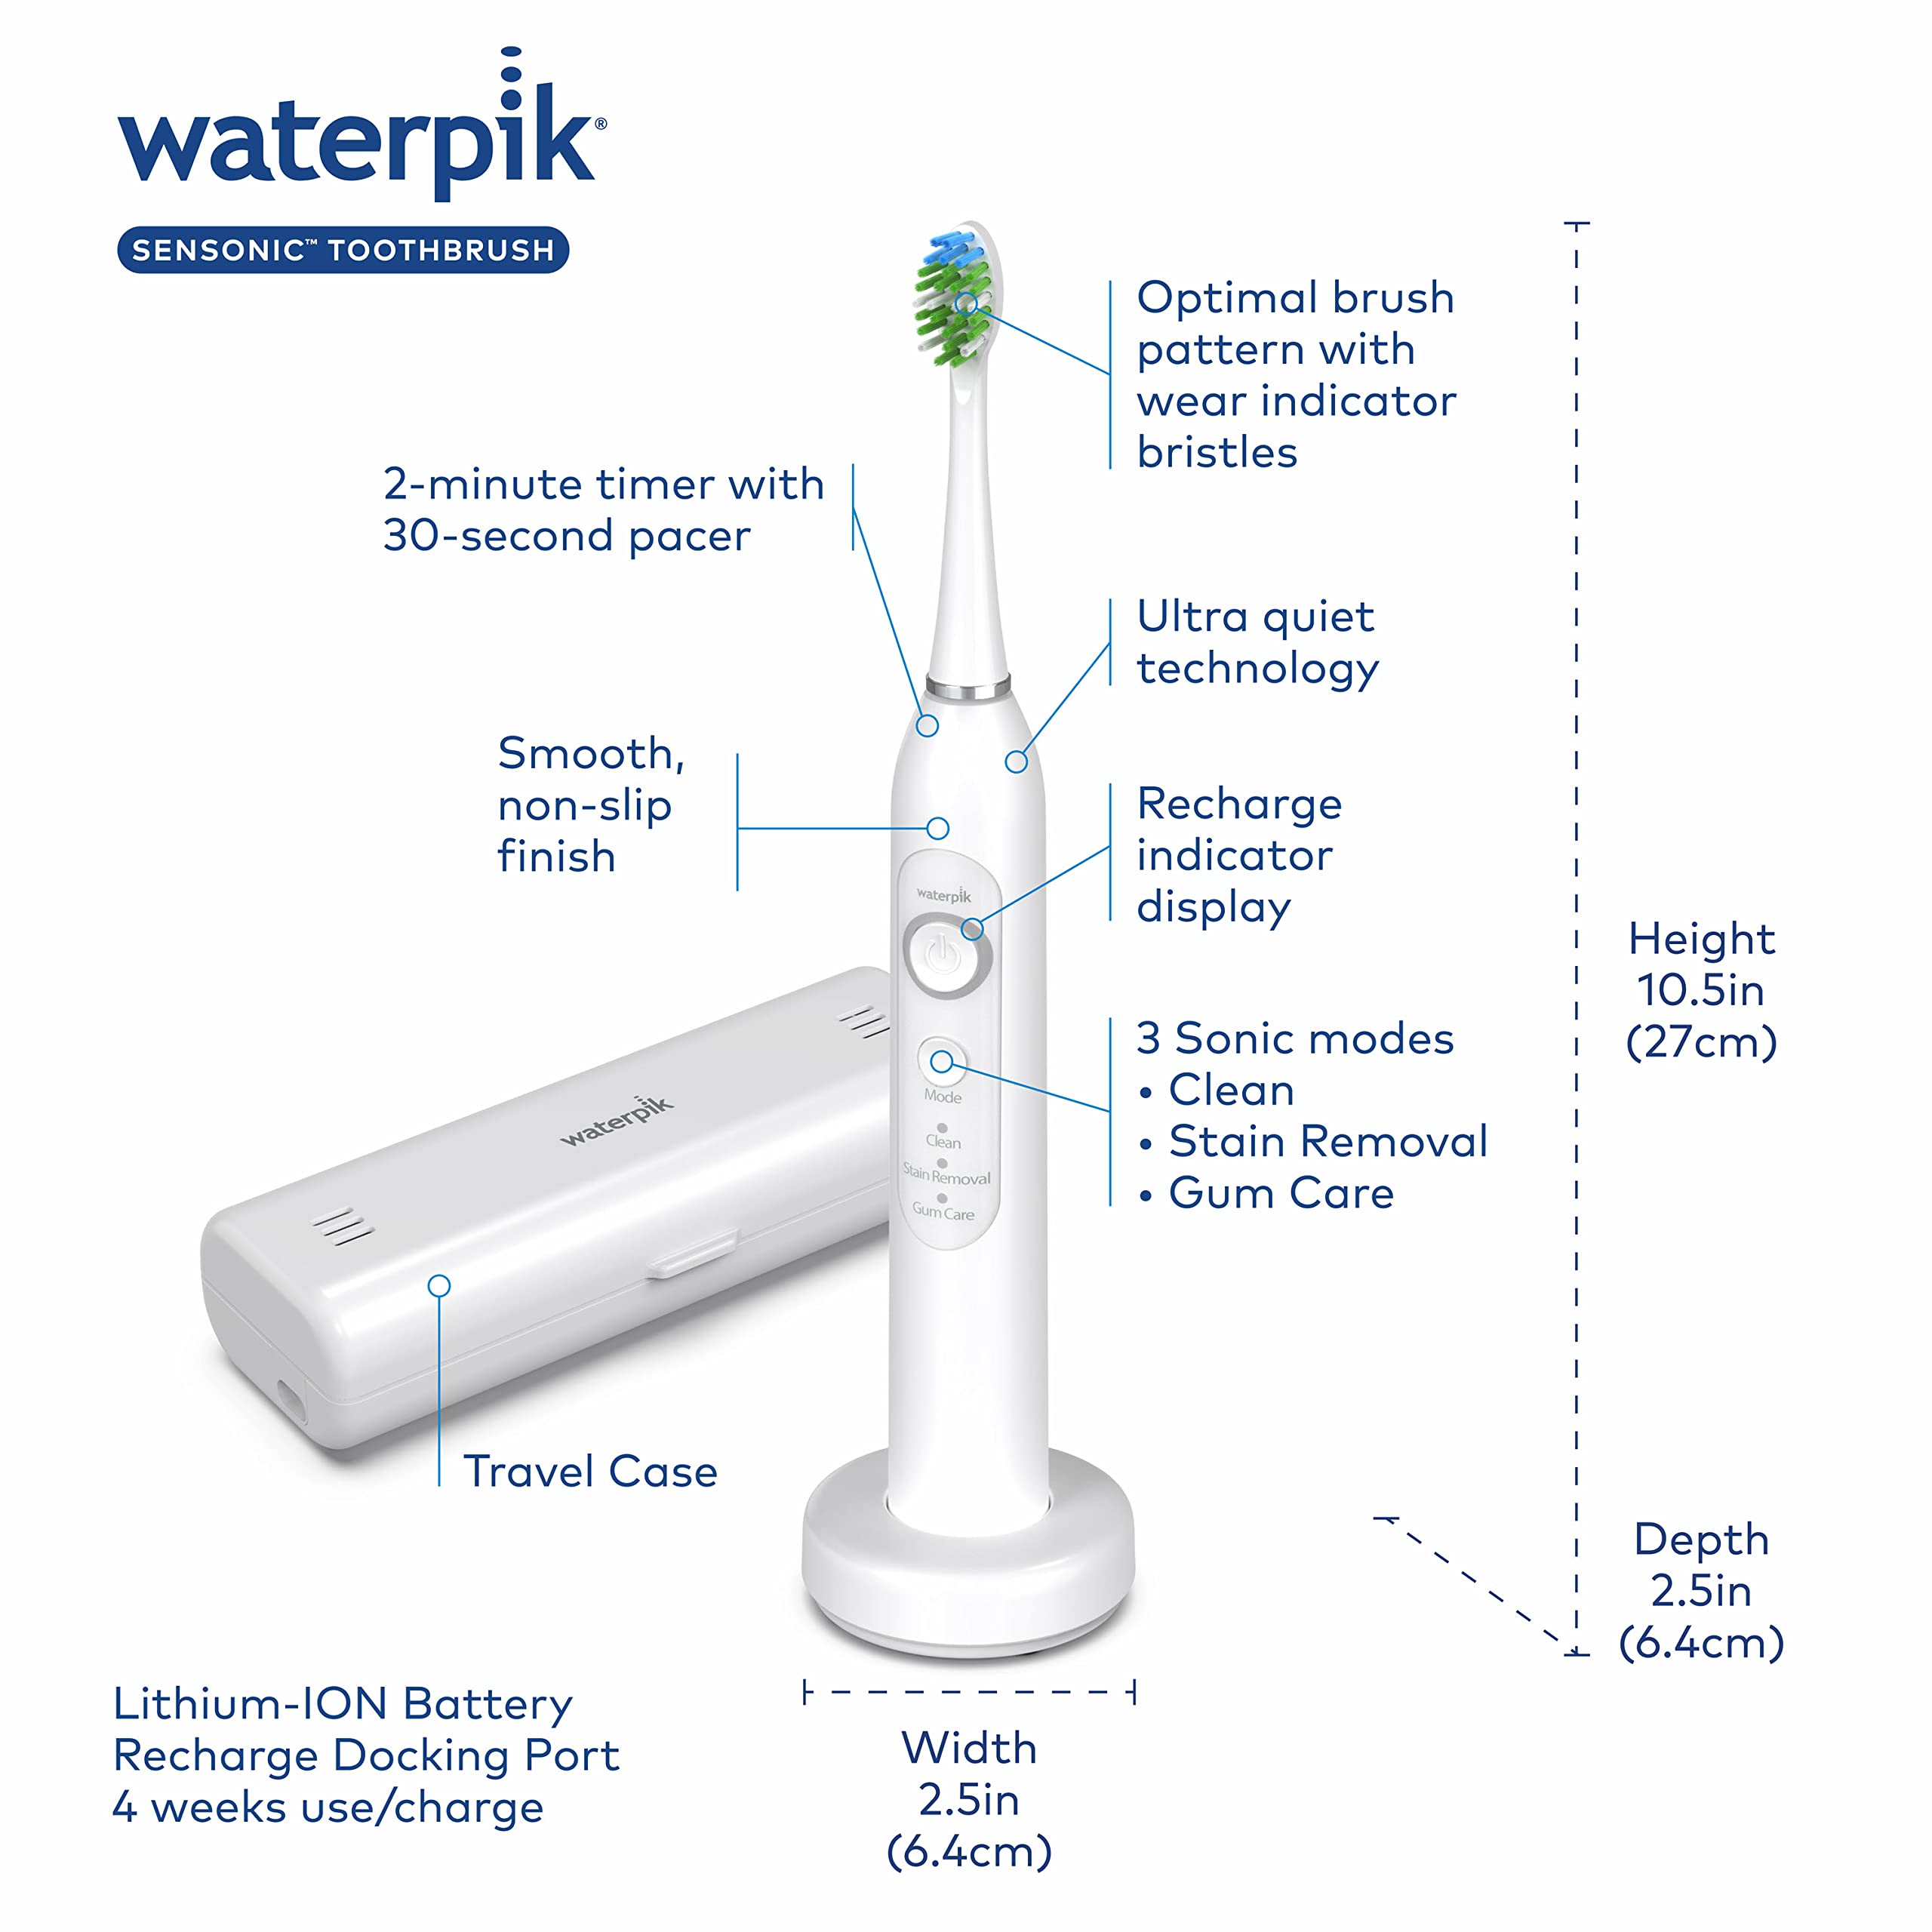 Waterpik Sensonic Sonic Electric Toothbrush, Rechargeable Toothbrush for Adults with 3 Modes, Travel Case, USB Charger, White STW-03W020